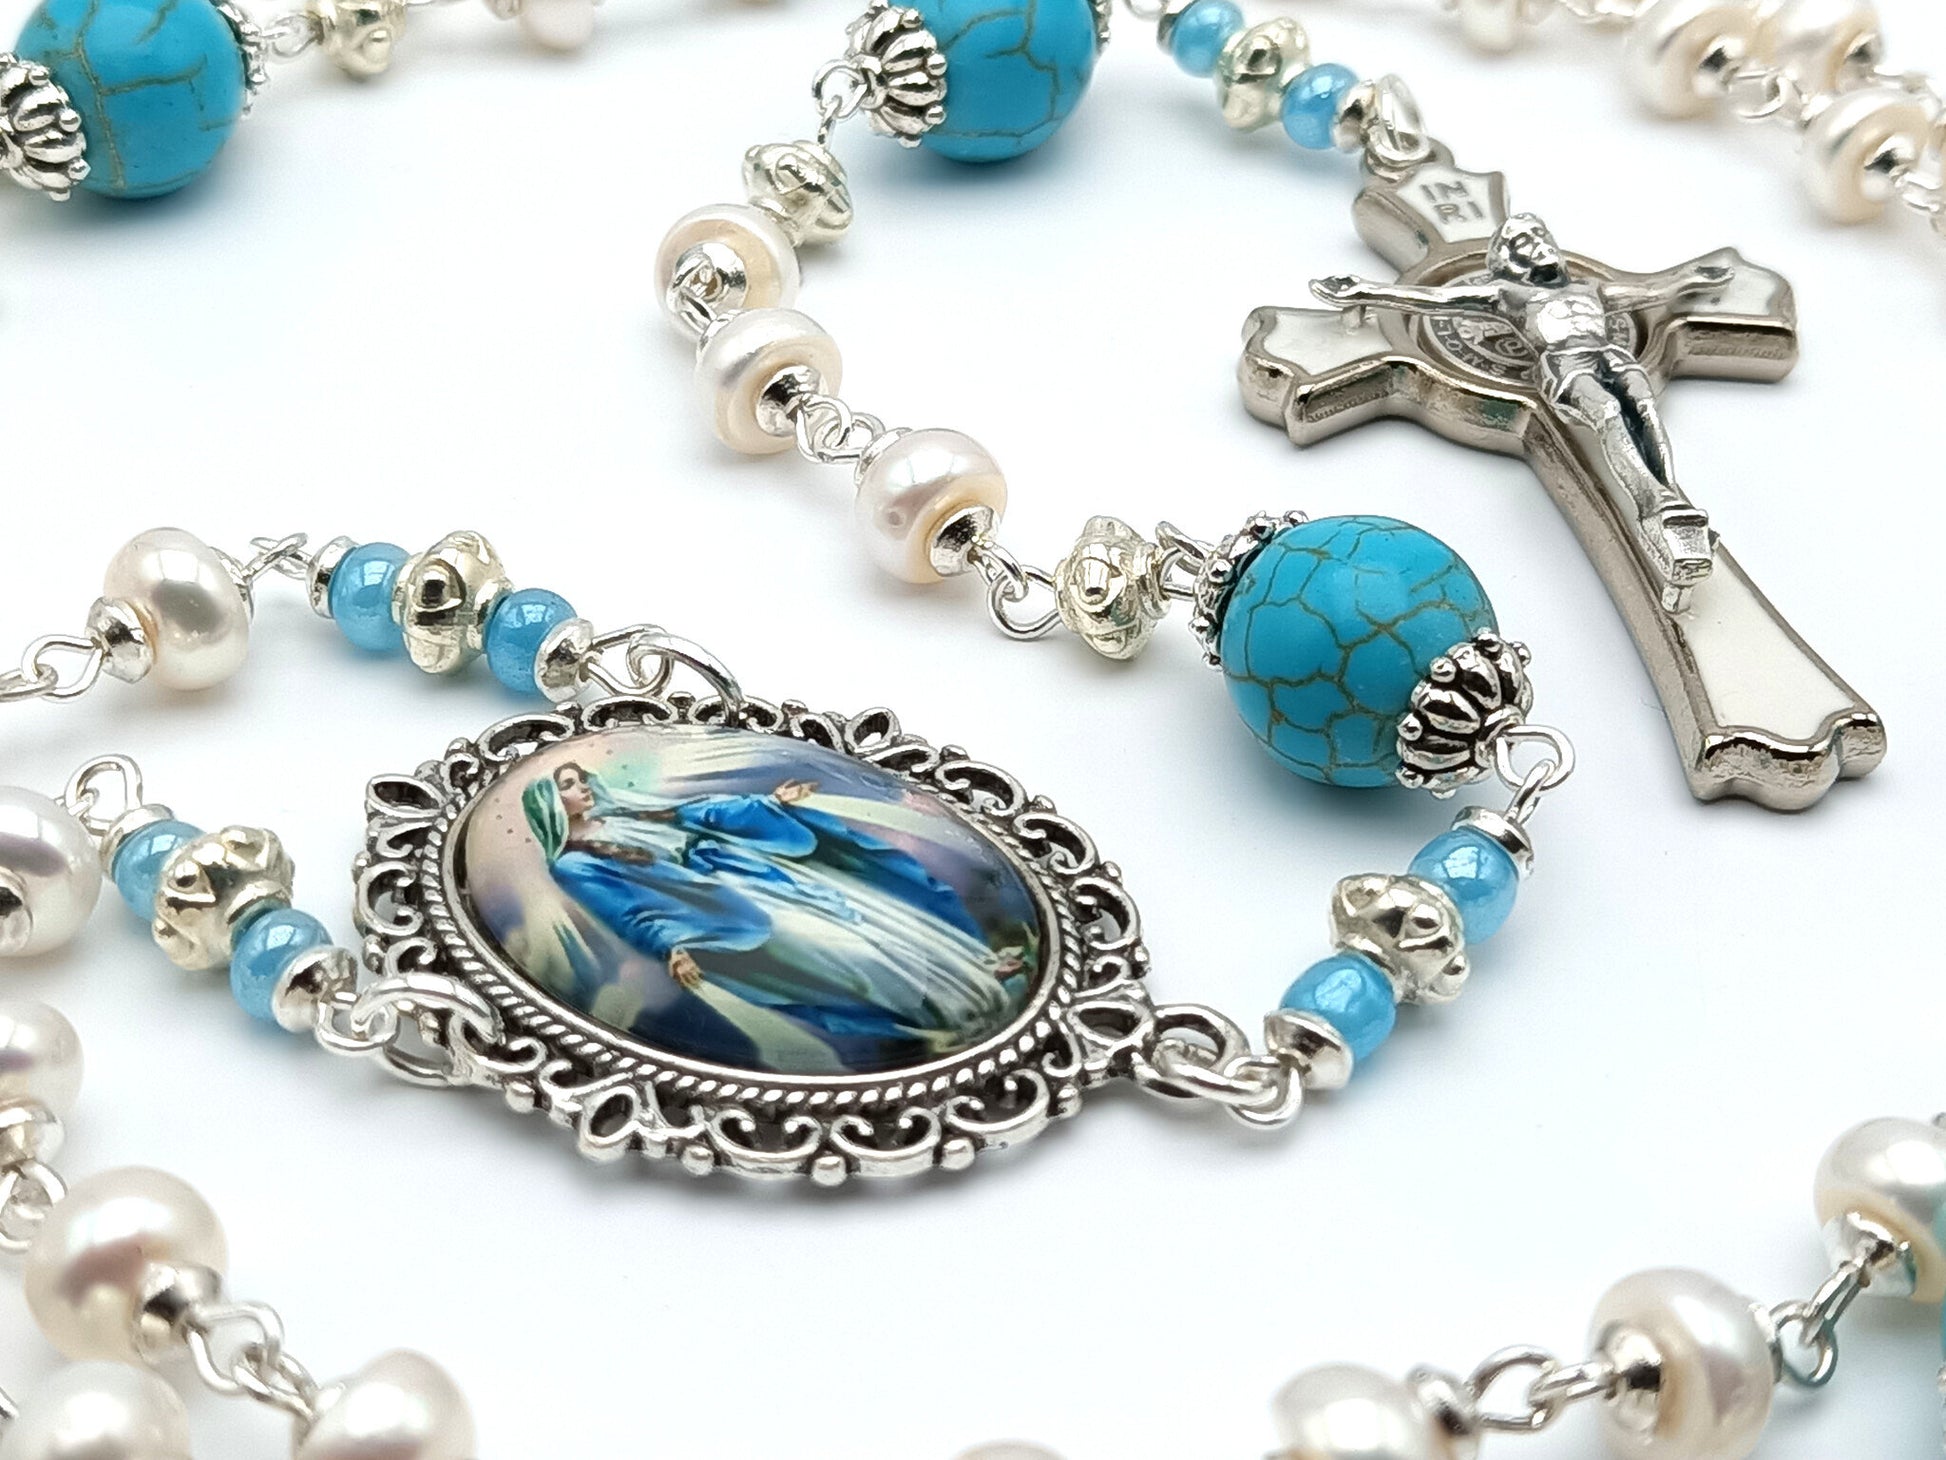 Our Lady of Grace unique rosary beads with genuine pearl beads, silver and white enamel Saint Benedict crucifix, blue gemstone pater beads and picture centre medal.